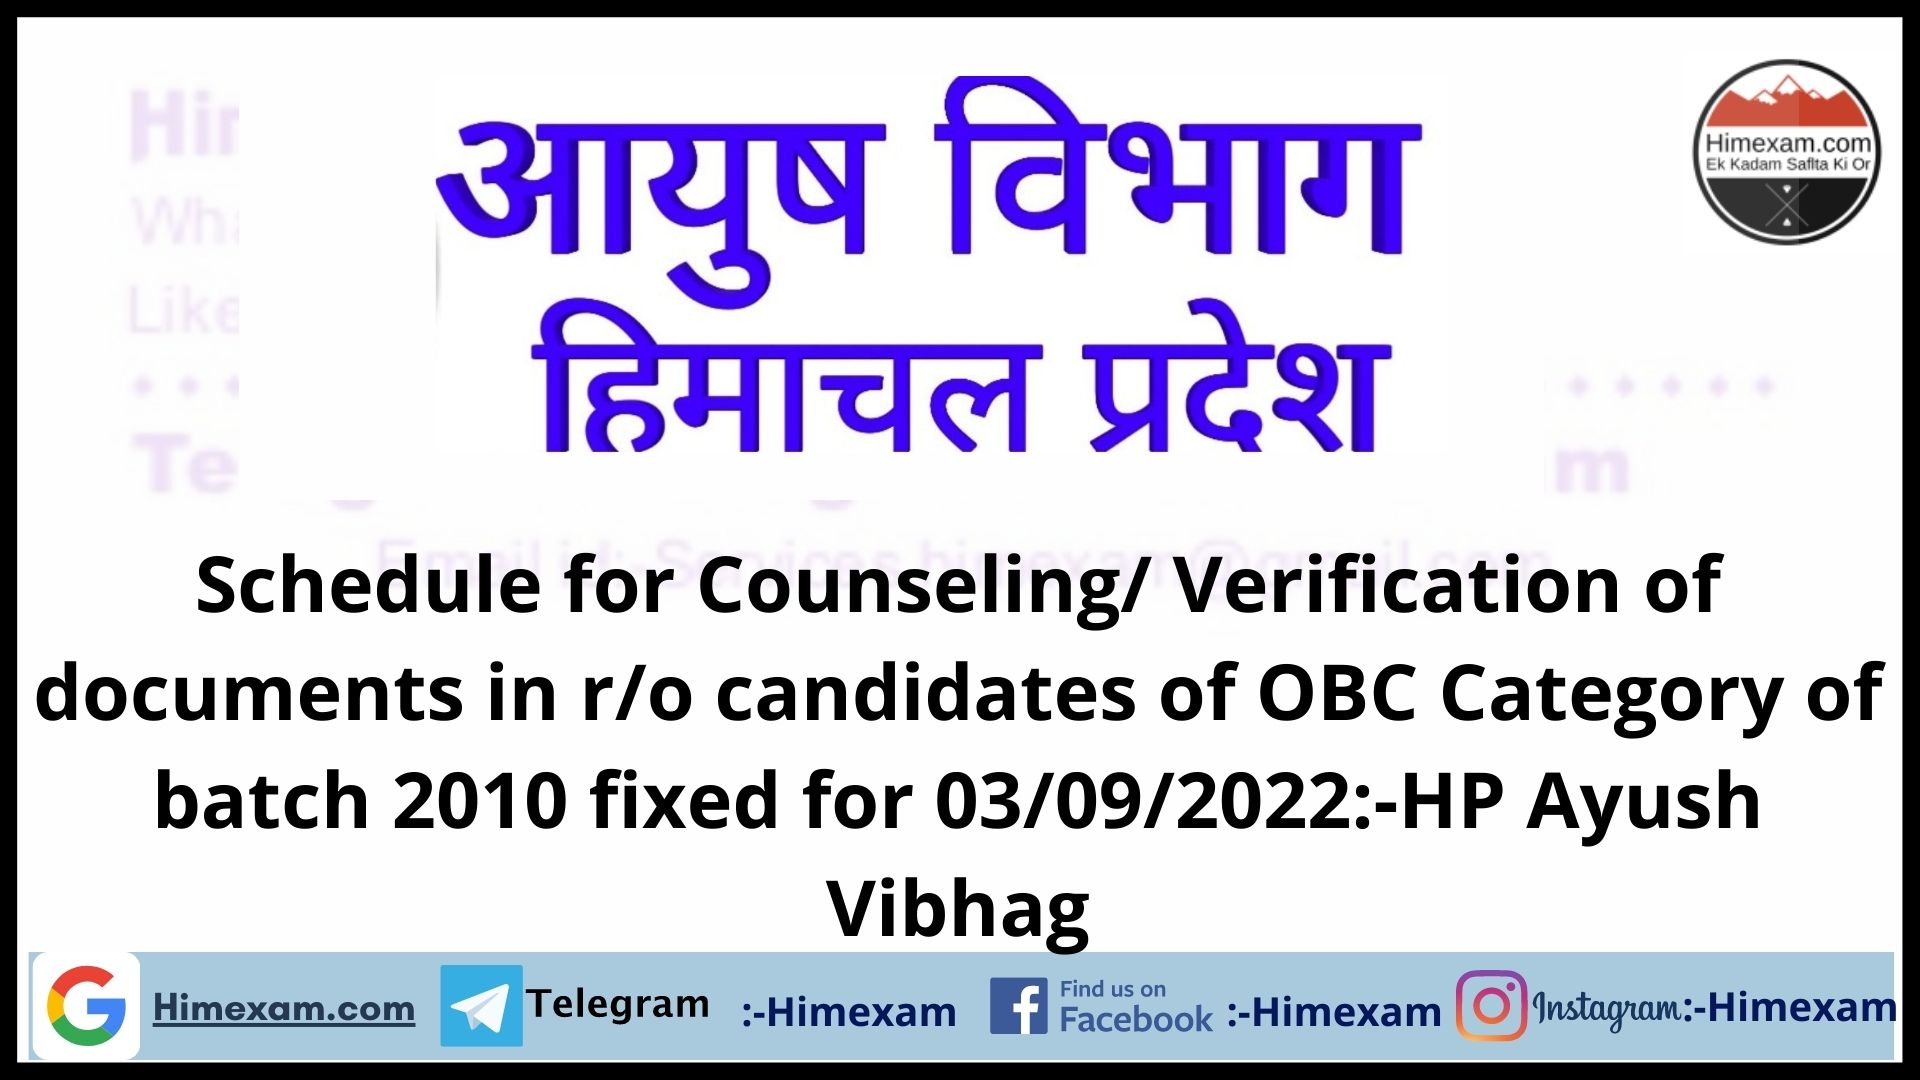 Schedule for Counseling/ Verification of documents in r/o candidates of OBC Category of batch 2010 fixed for 03/09/2022:-HP Ayush Vibhag